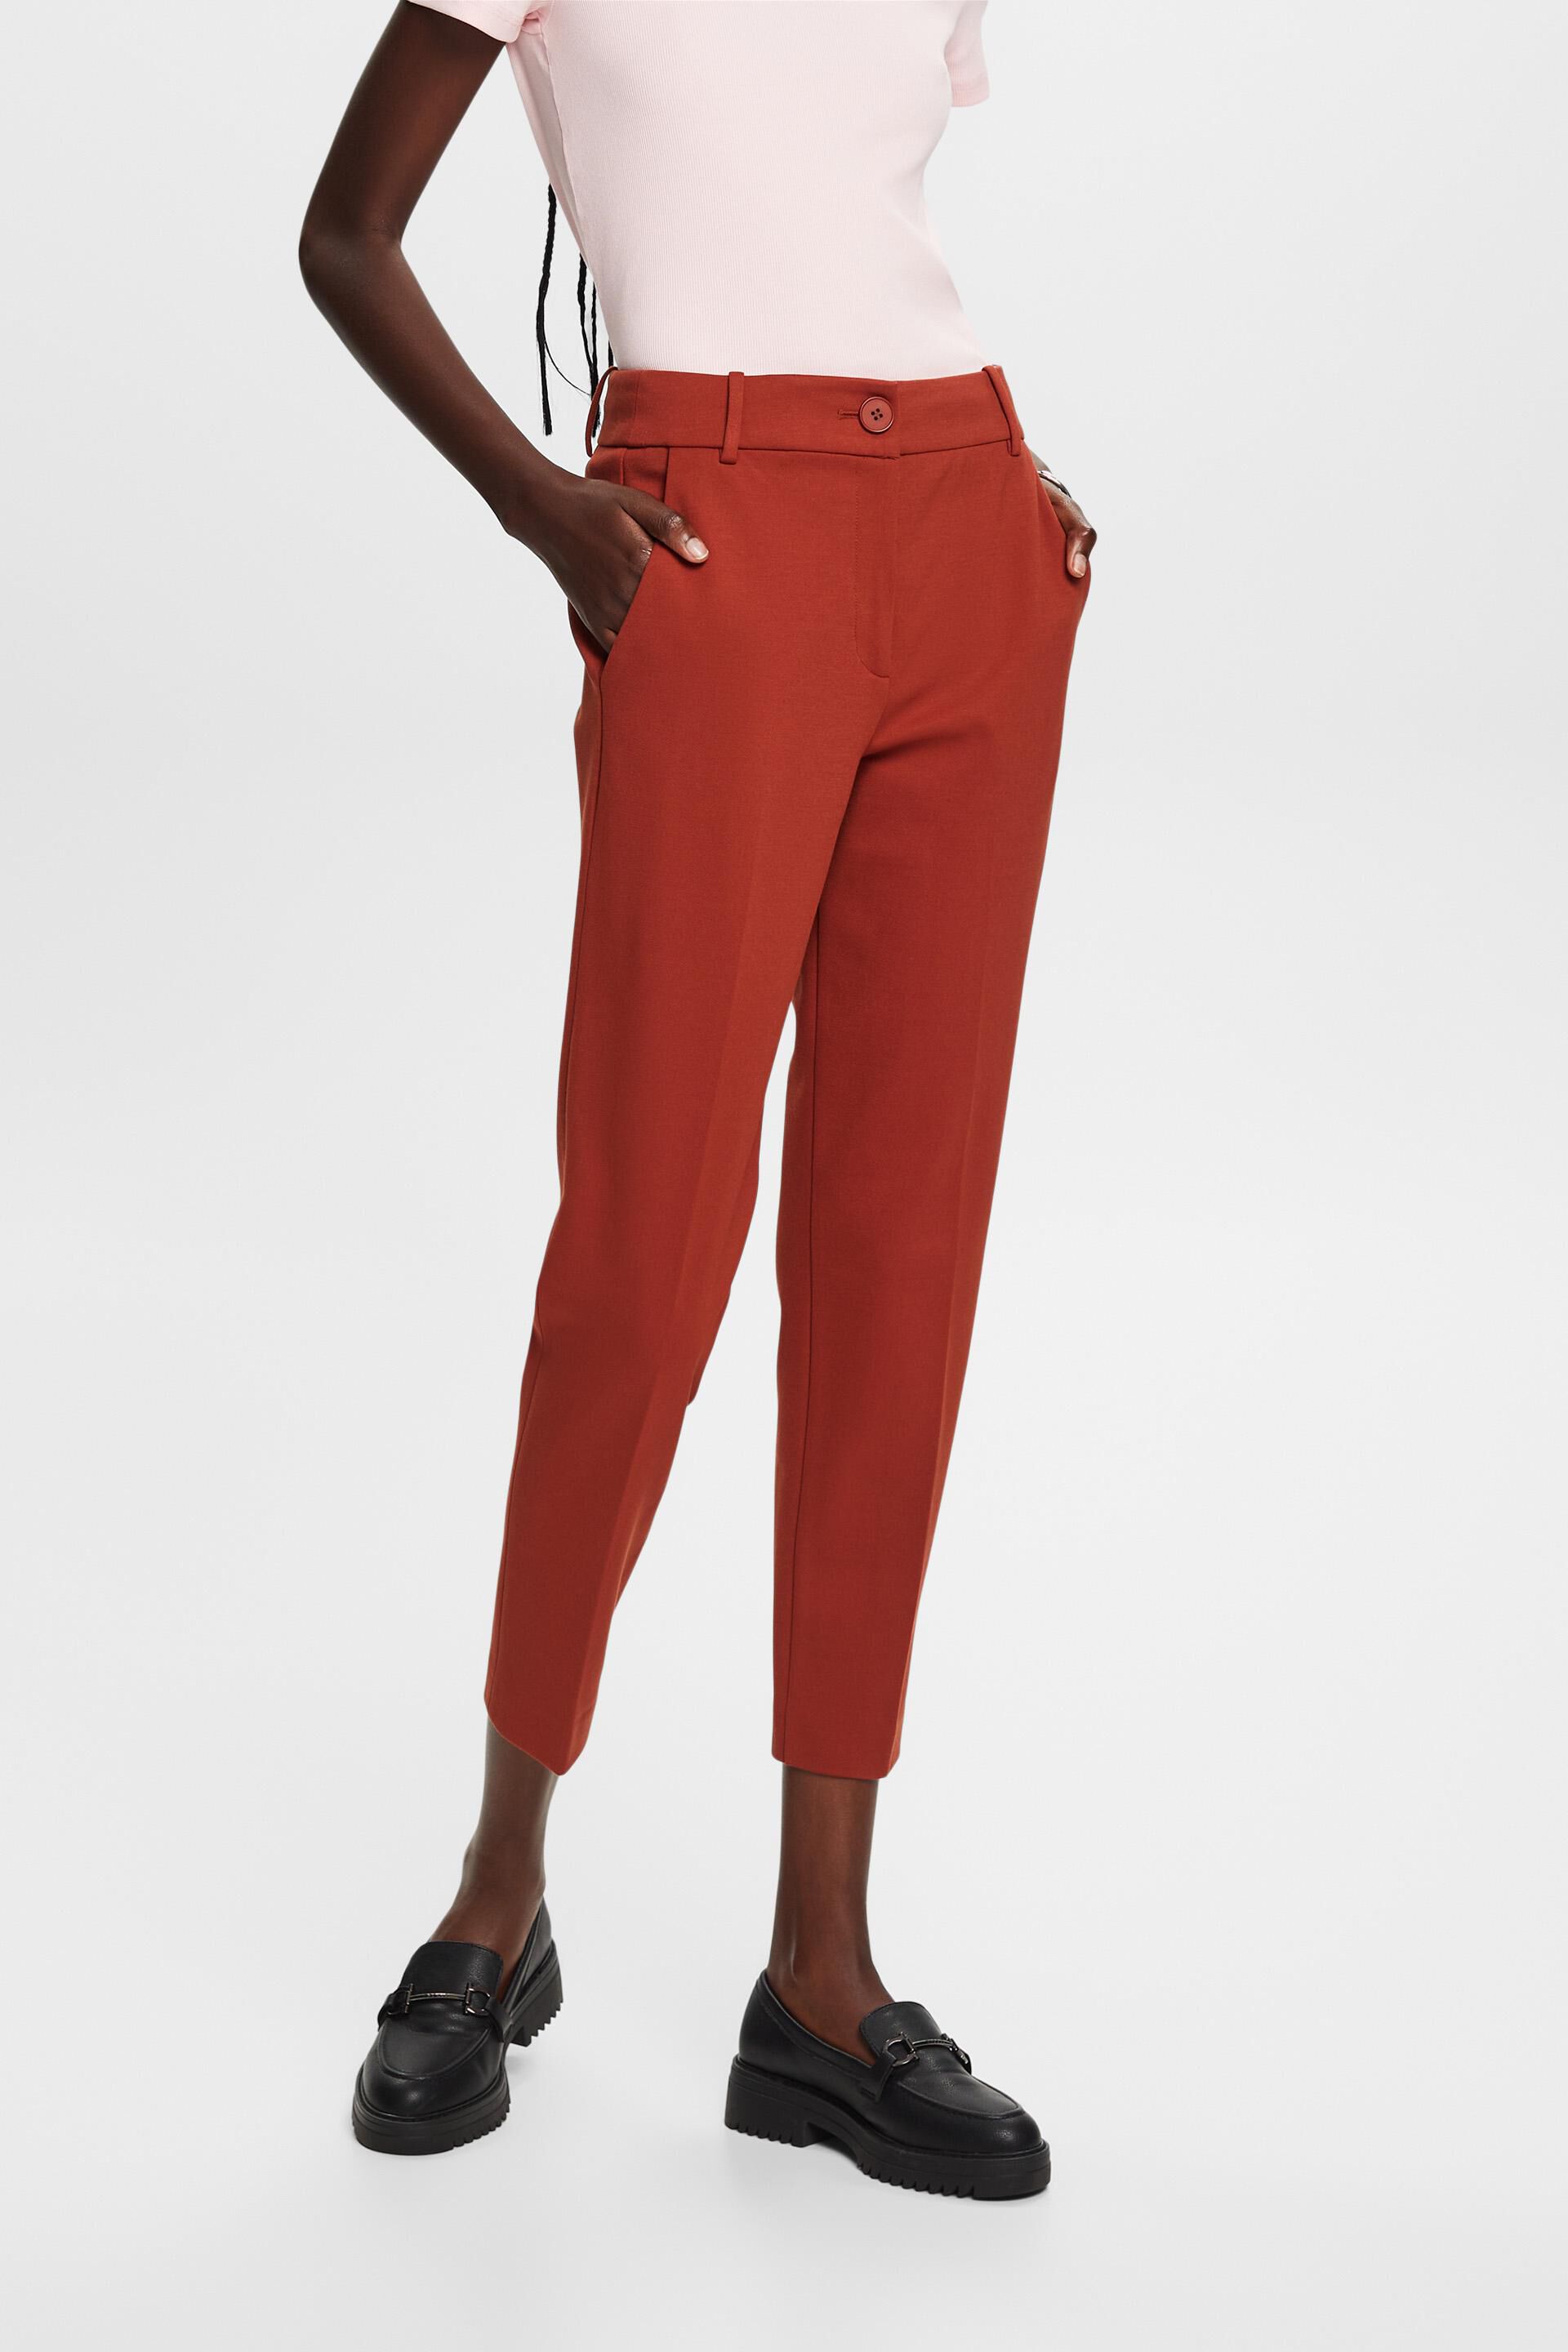 Esprit cropped Punto trousers jersey